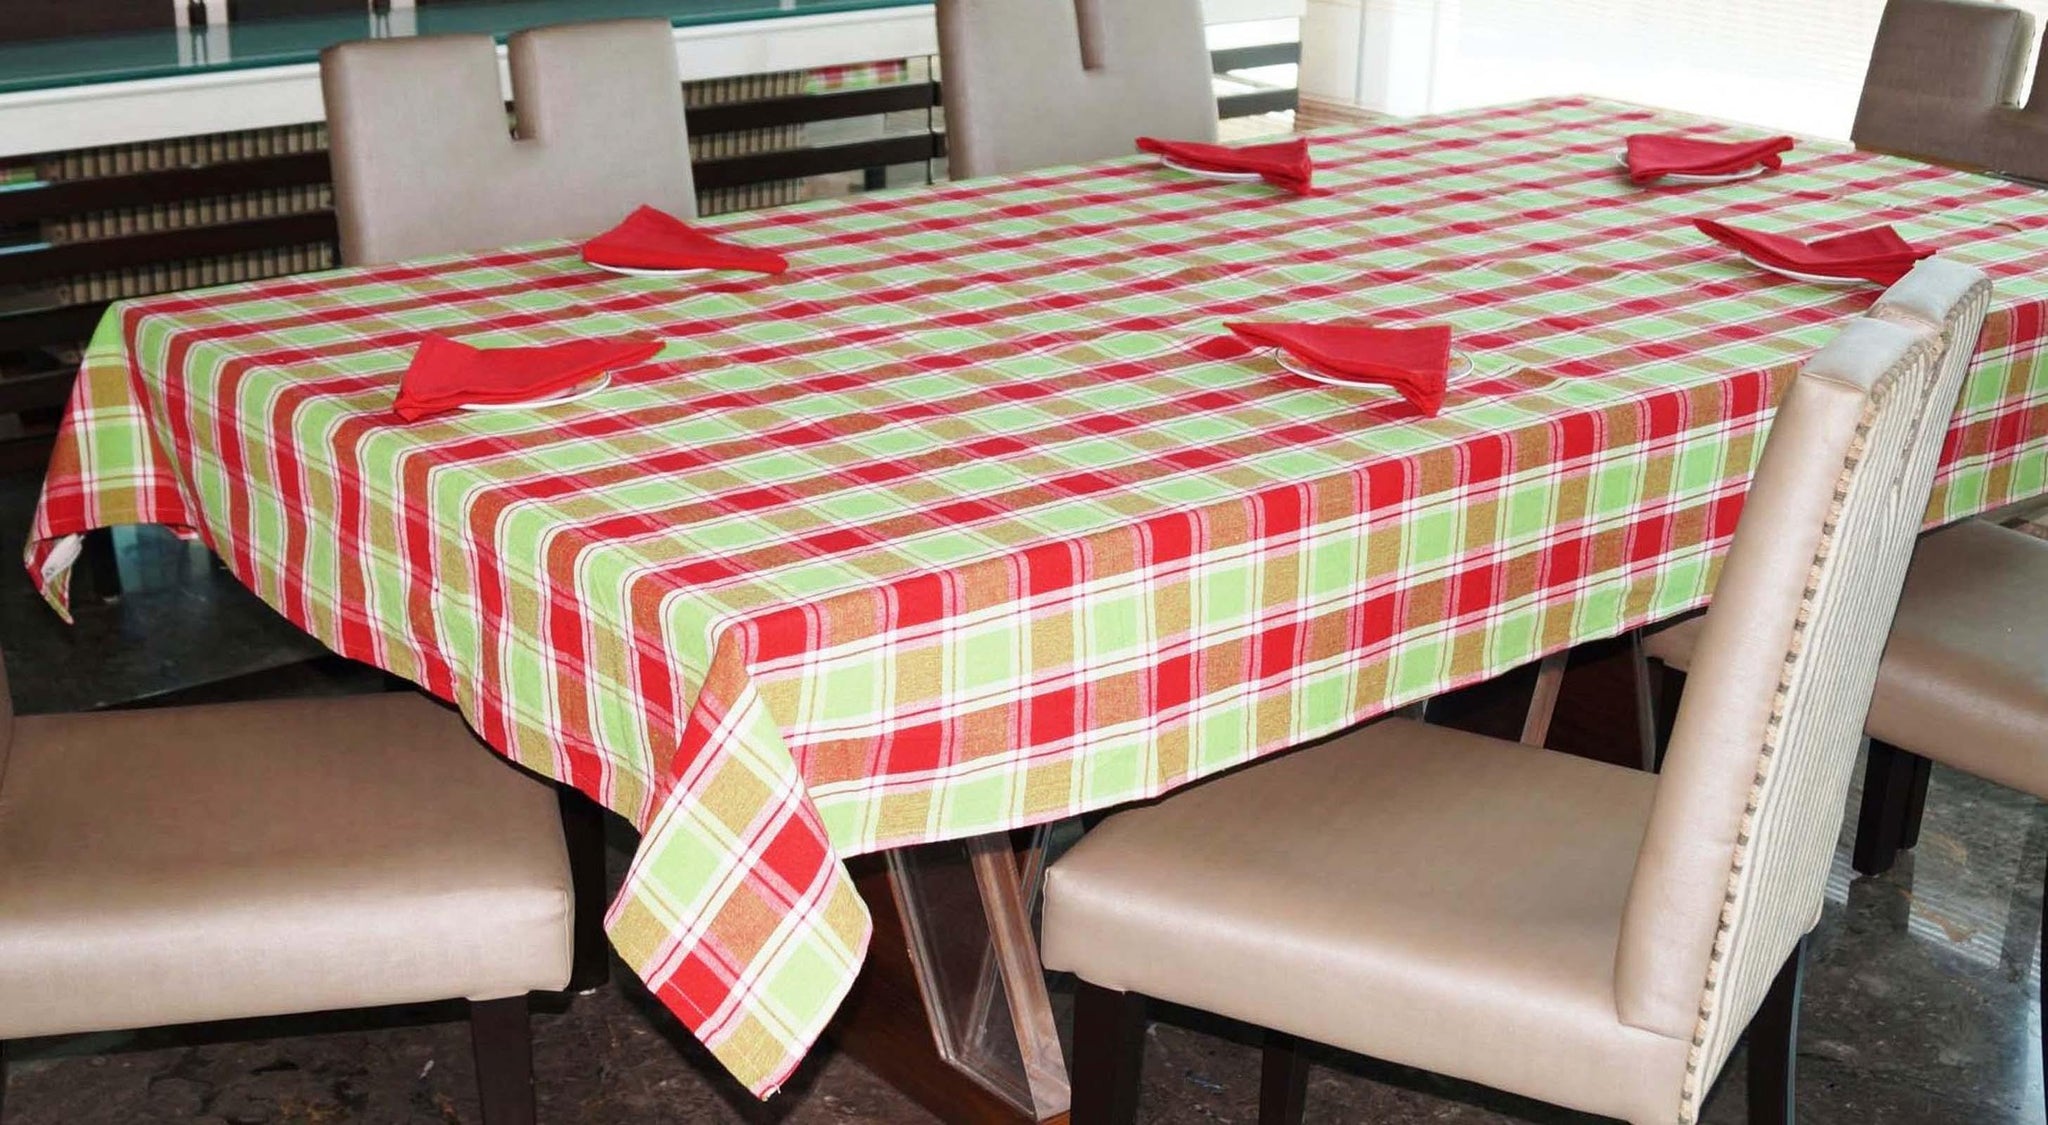 Lushomes Yarn Dyed Red and Green Checks 6 seater Table cloth & Napkins Set - Lushomes